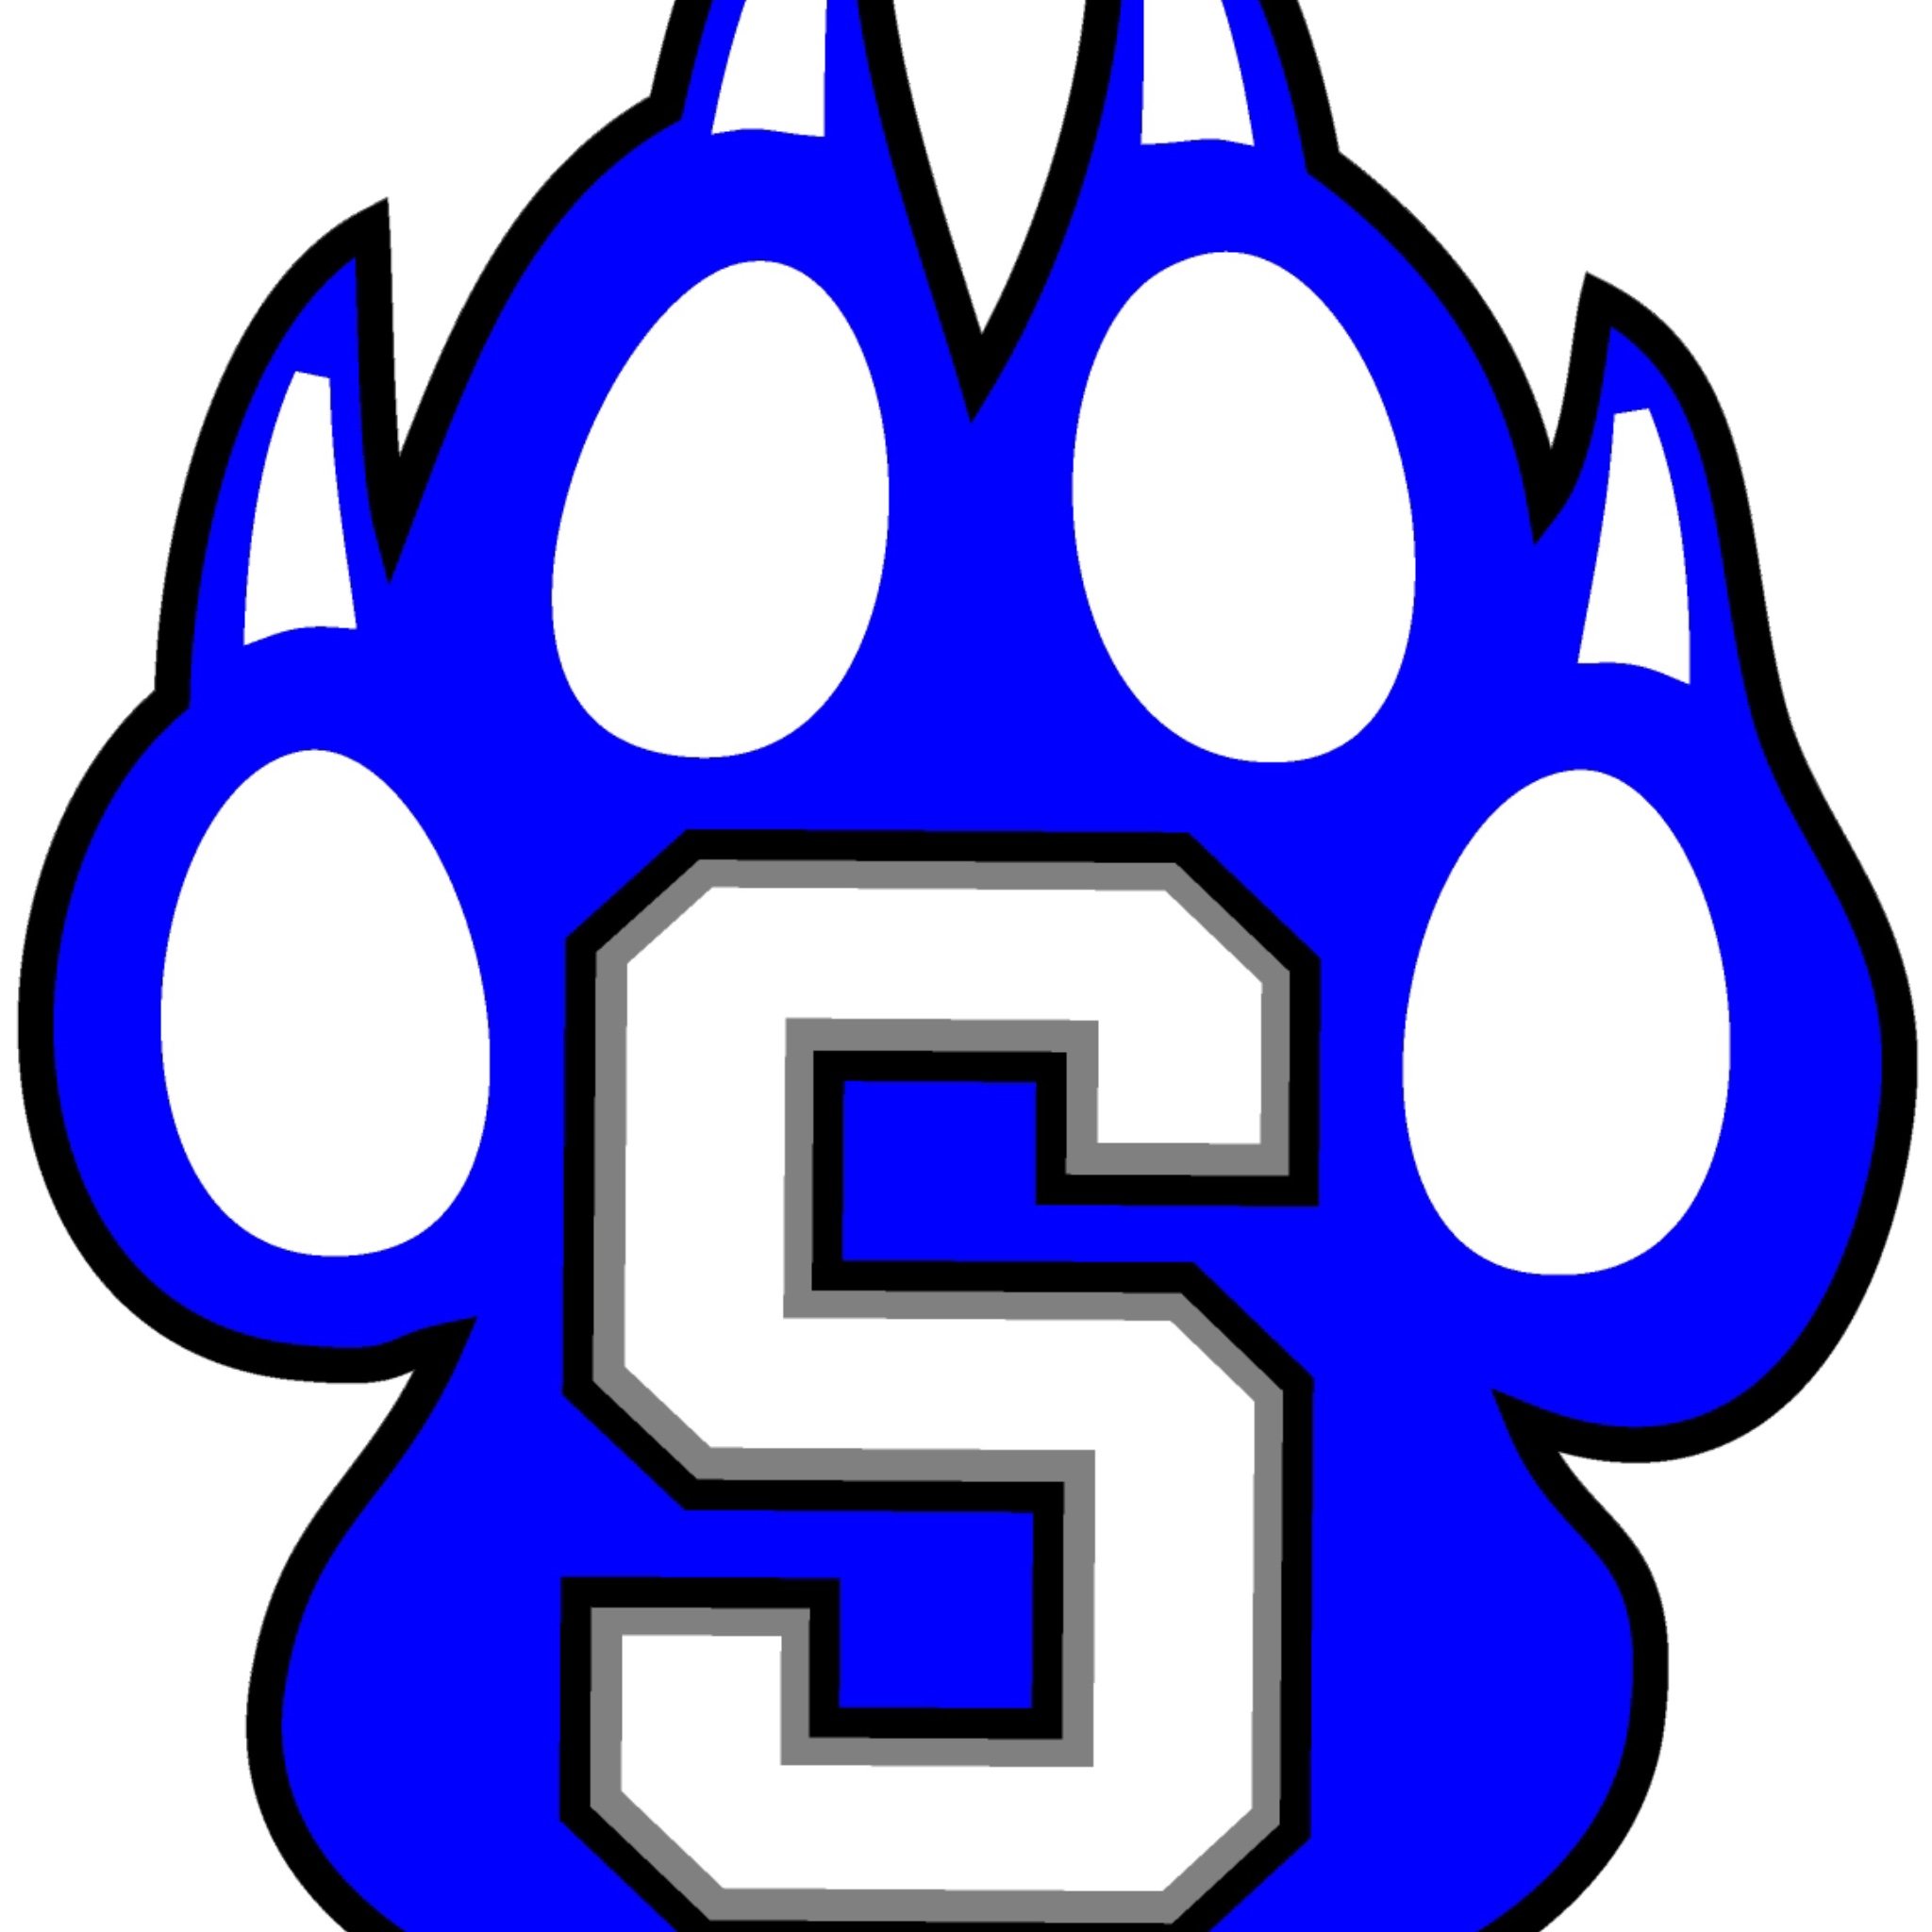 Follow us for all Snowflake Lobo news, scores, and information.